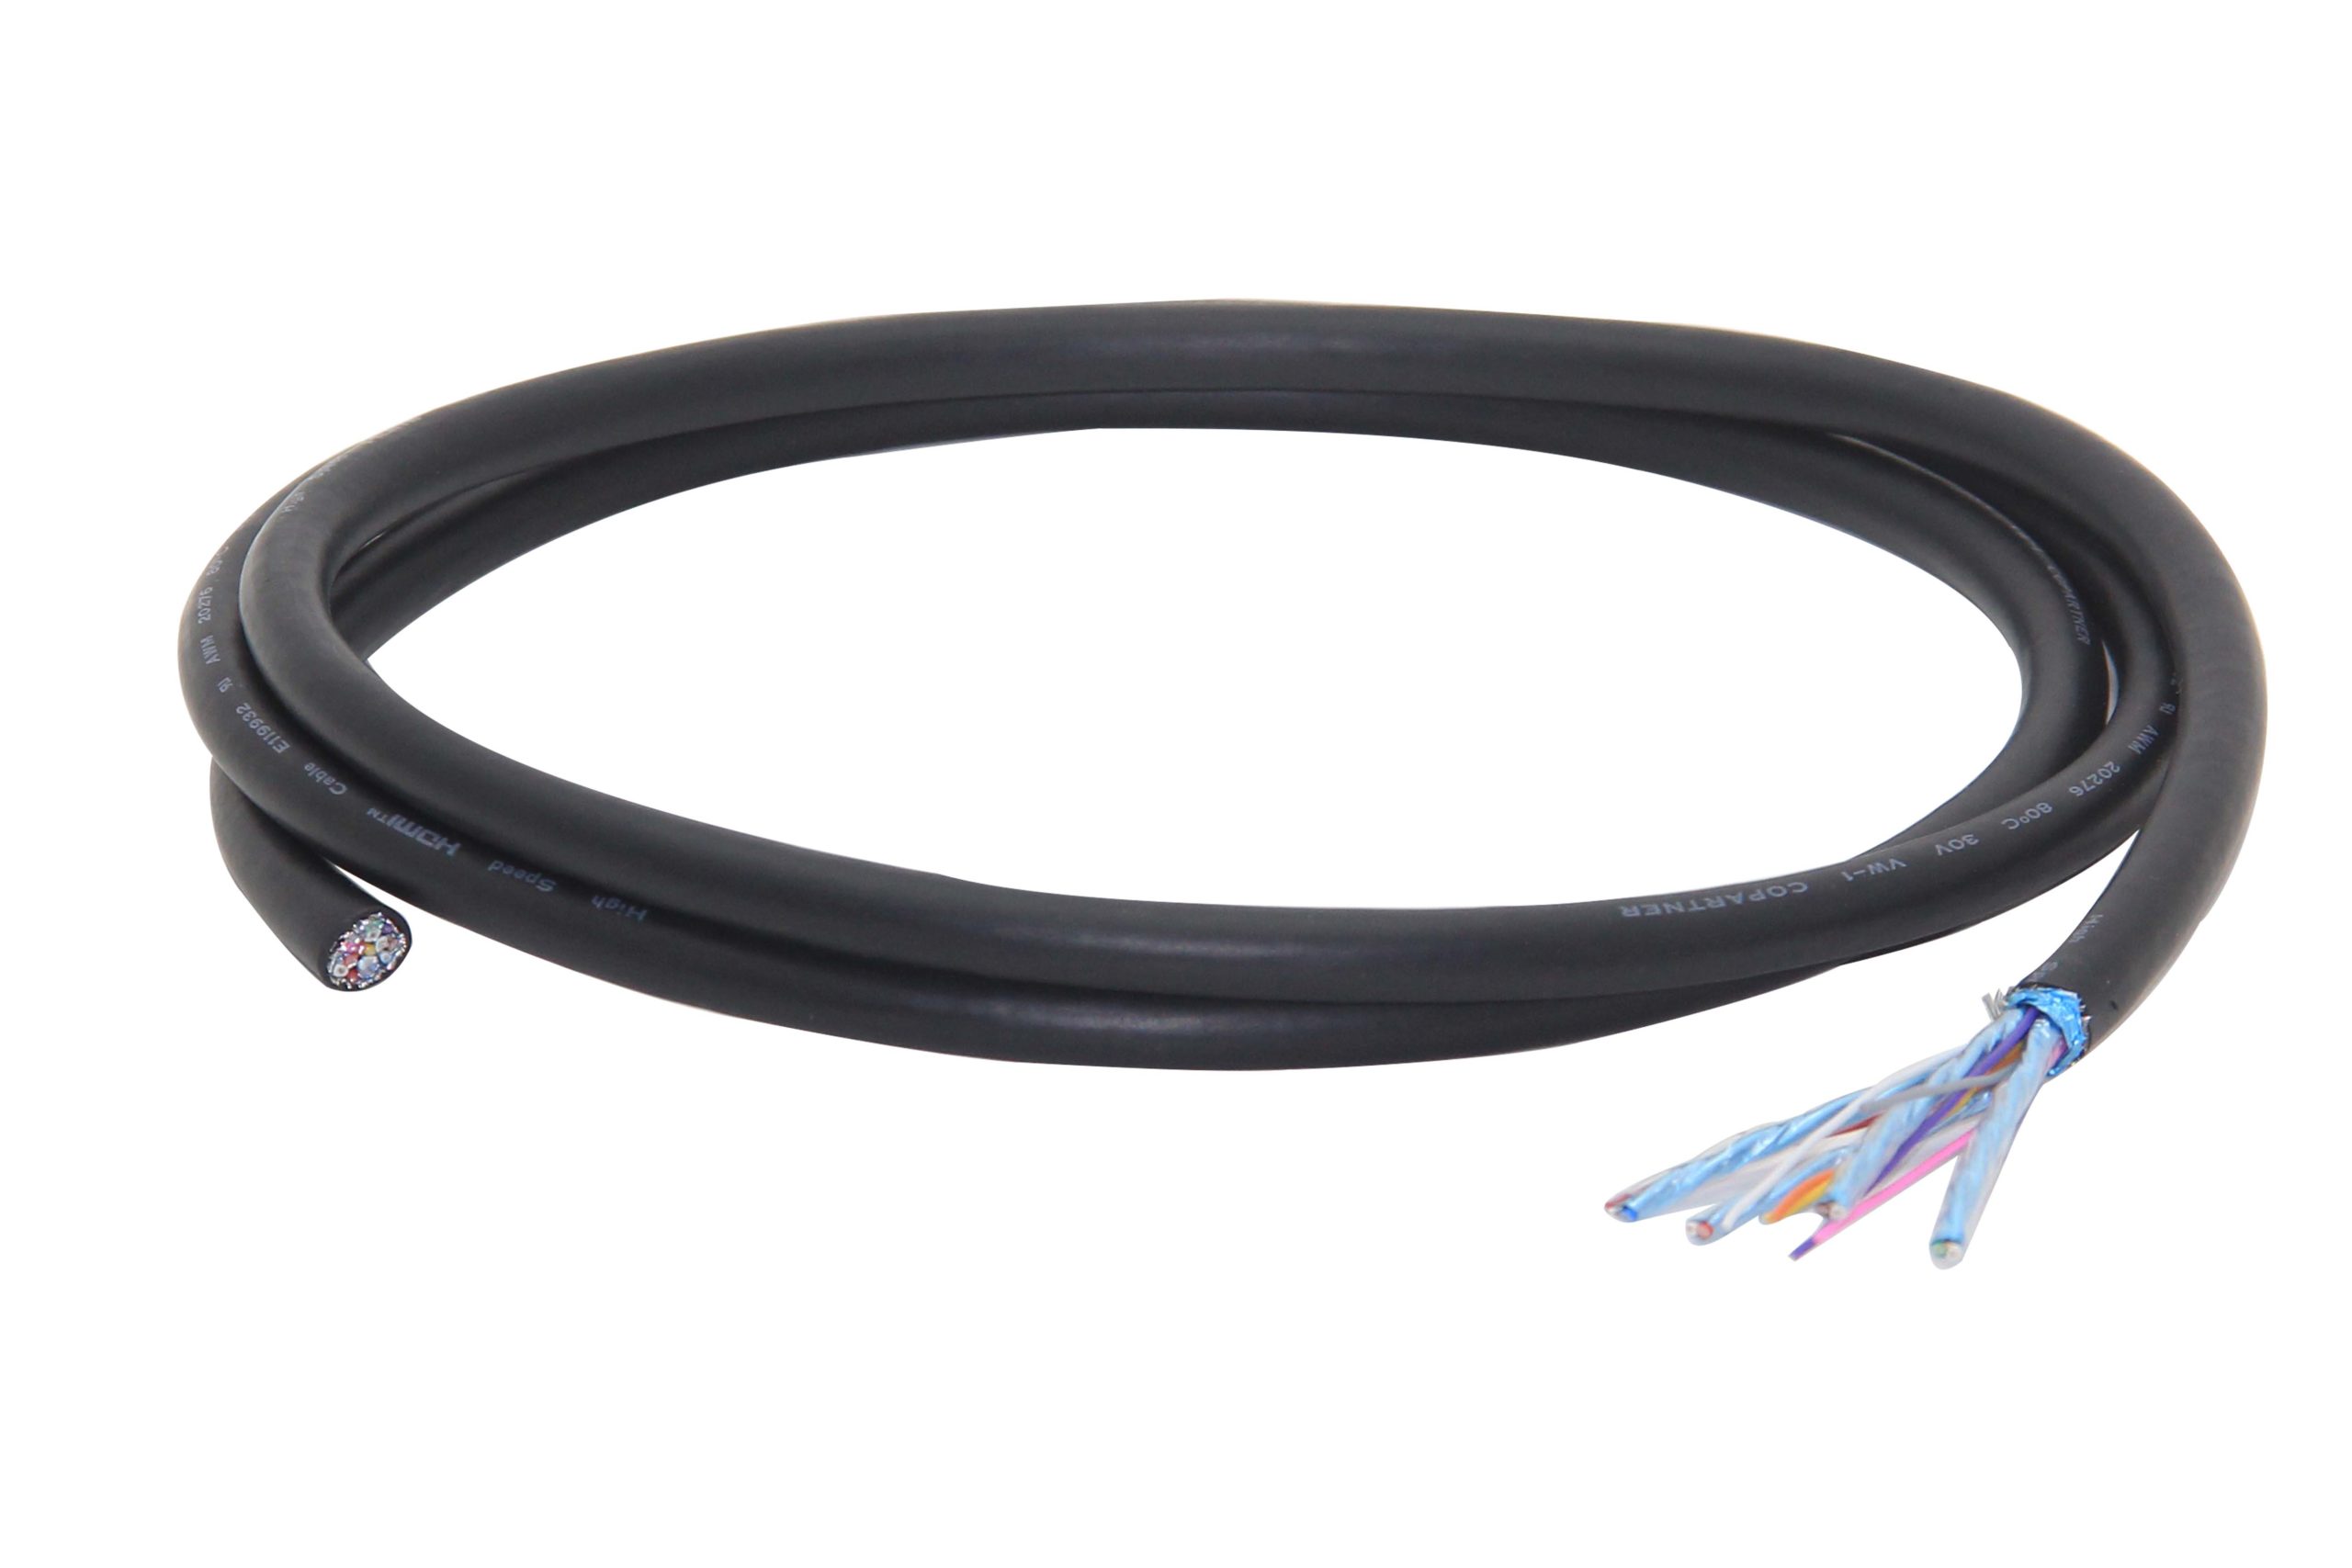 BizLink offers halogen-free thermoplastic insulated cables